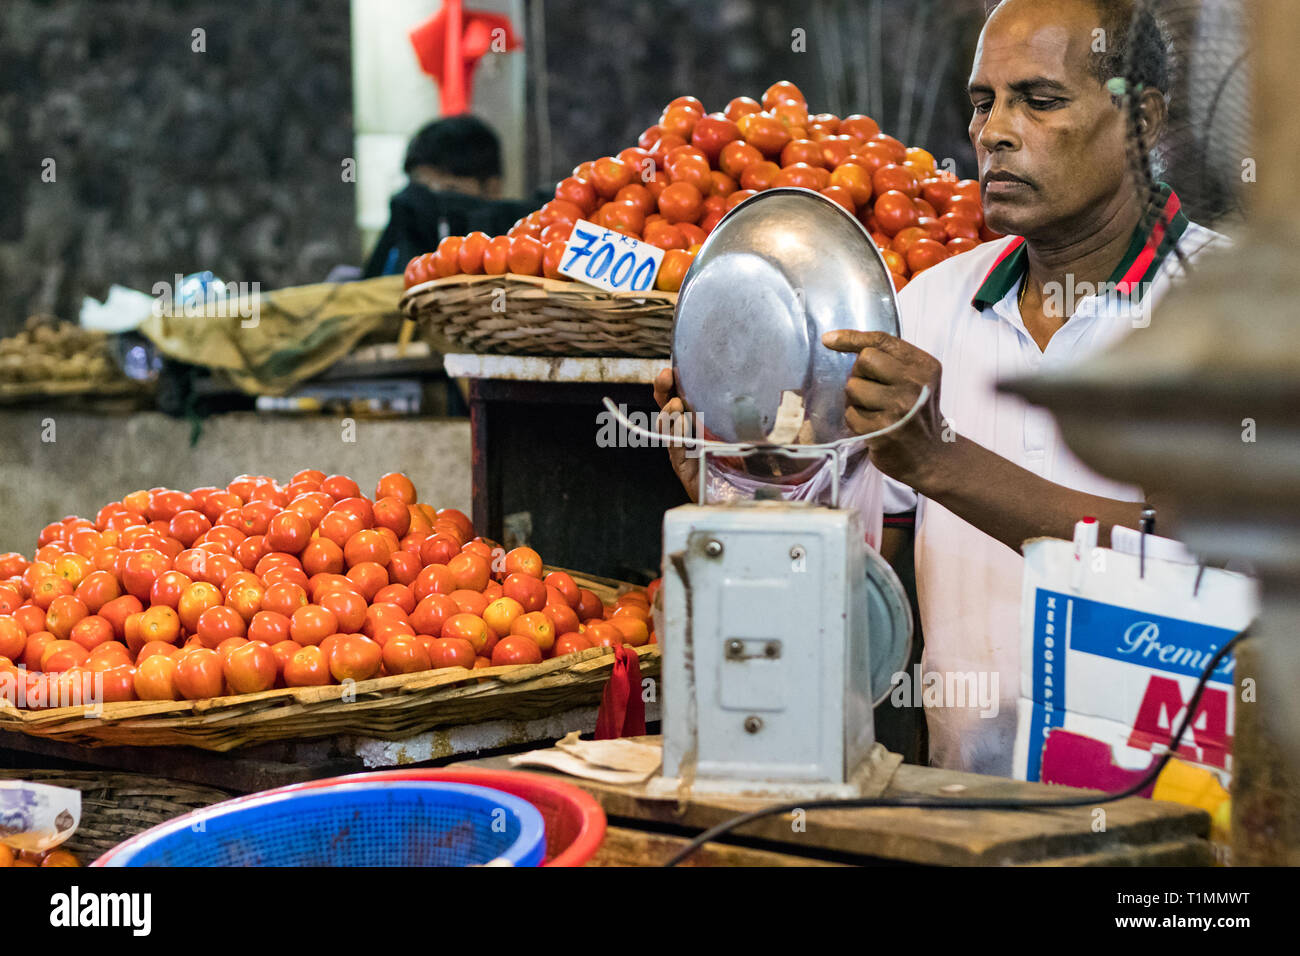 Port Louis, Mauritius - January 29, 2019: A vegetables vendor putting tomatoes inside a bag for a customer at the Central Market in Port Louis, Maurit Stock Photo